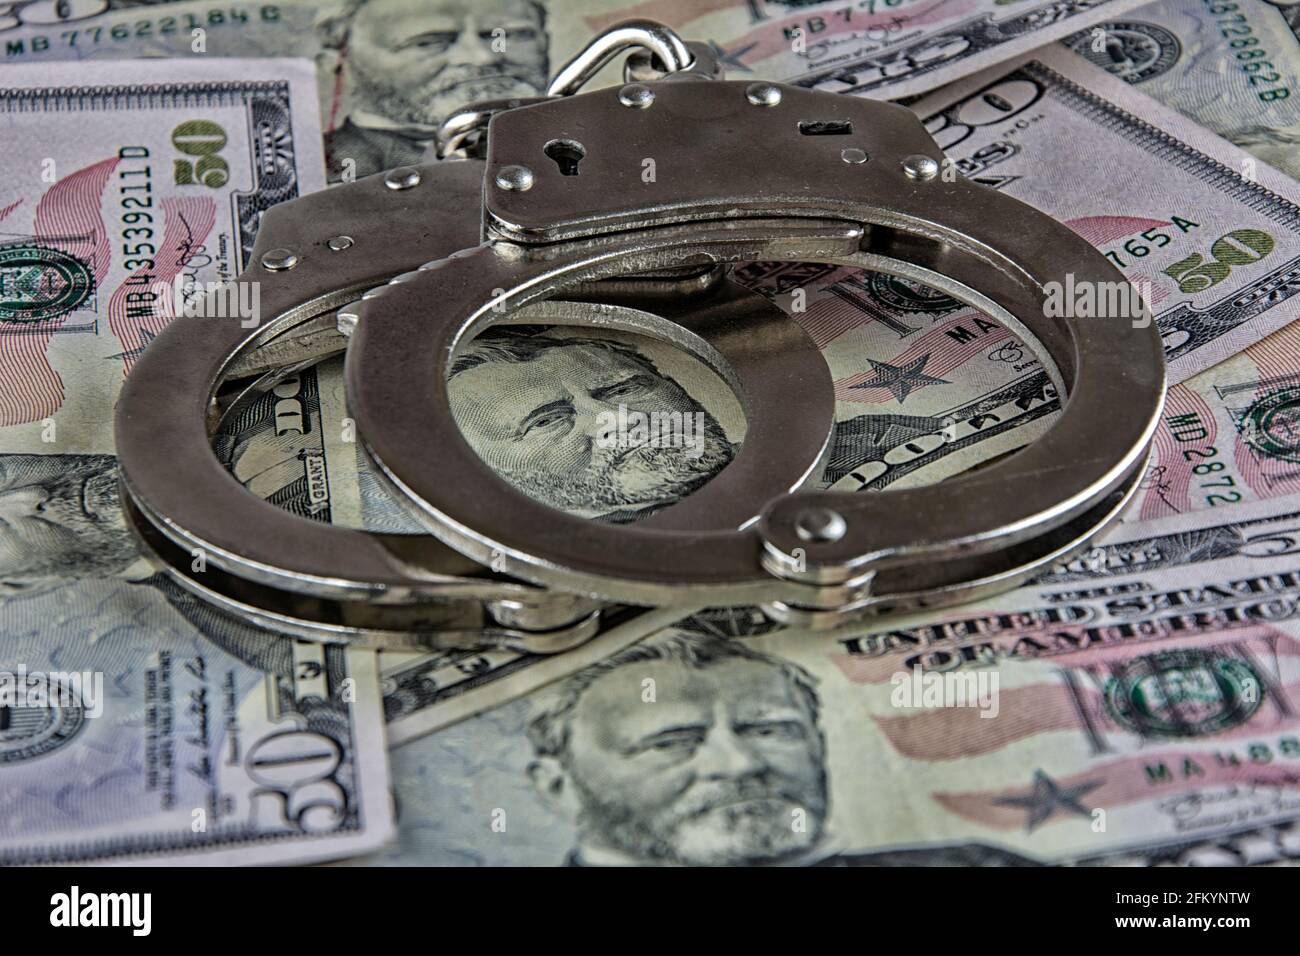 Handcuffs on dollars in close-up on a dollar-covered screen Stock Photo